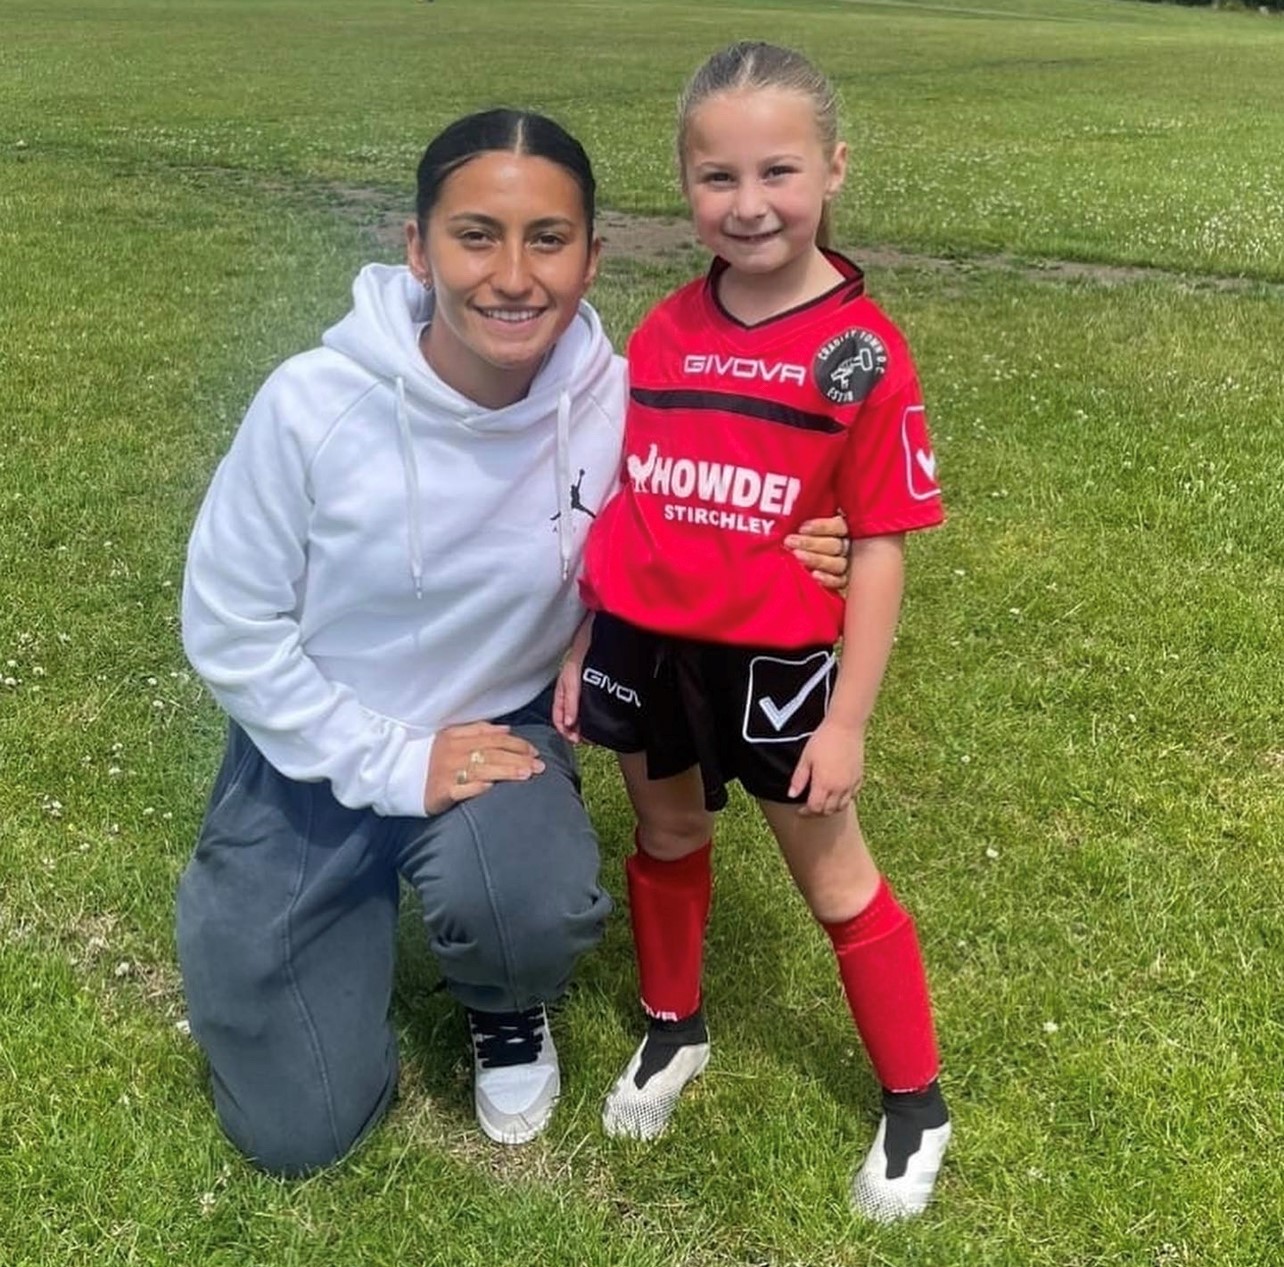 Harper Mills, 6, with Maz Pacheco, who plays as a defender for FA WSL club Aston Villa.